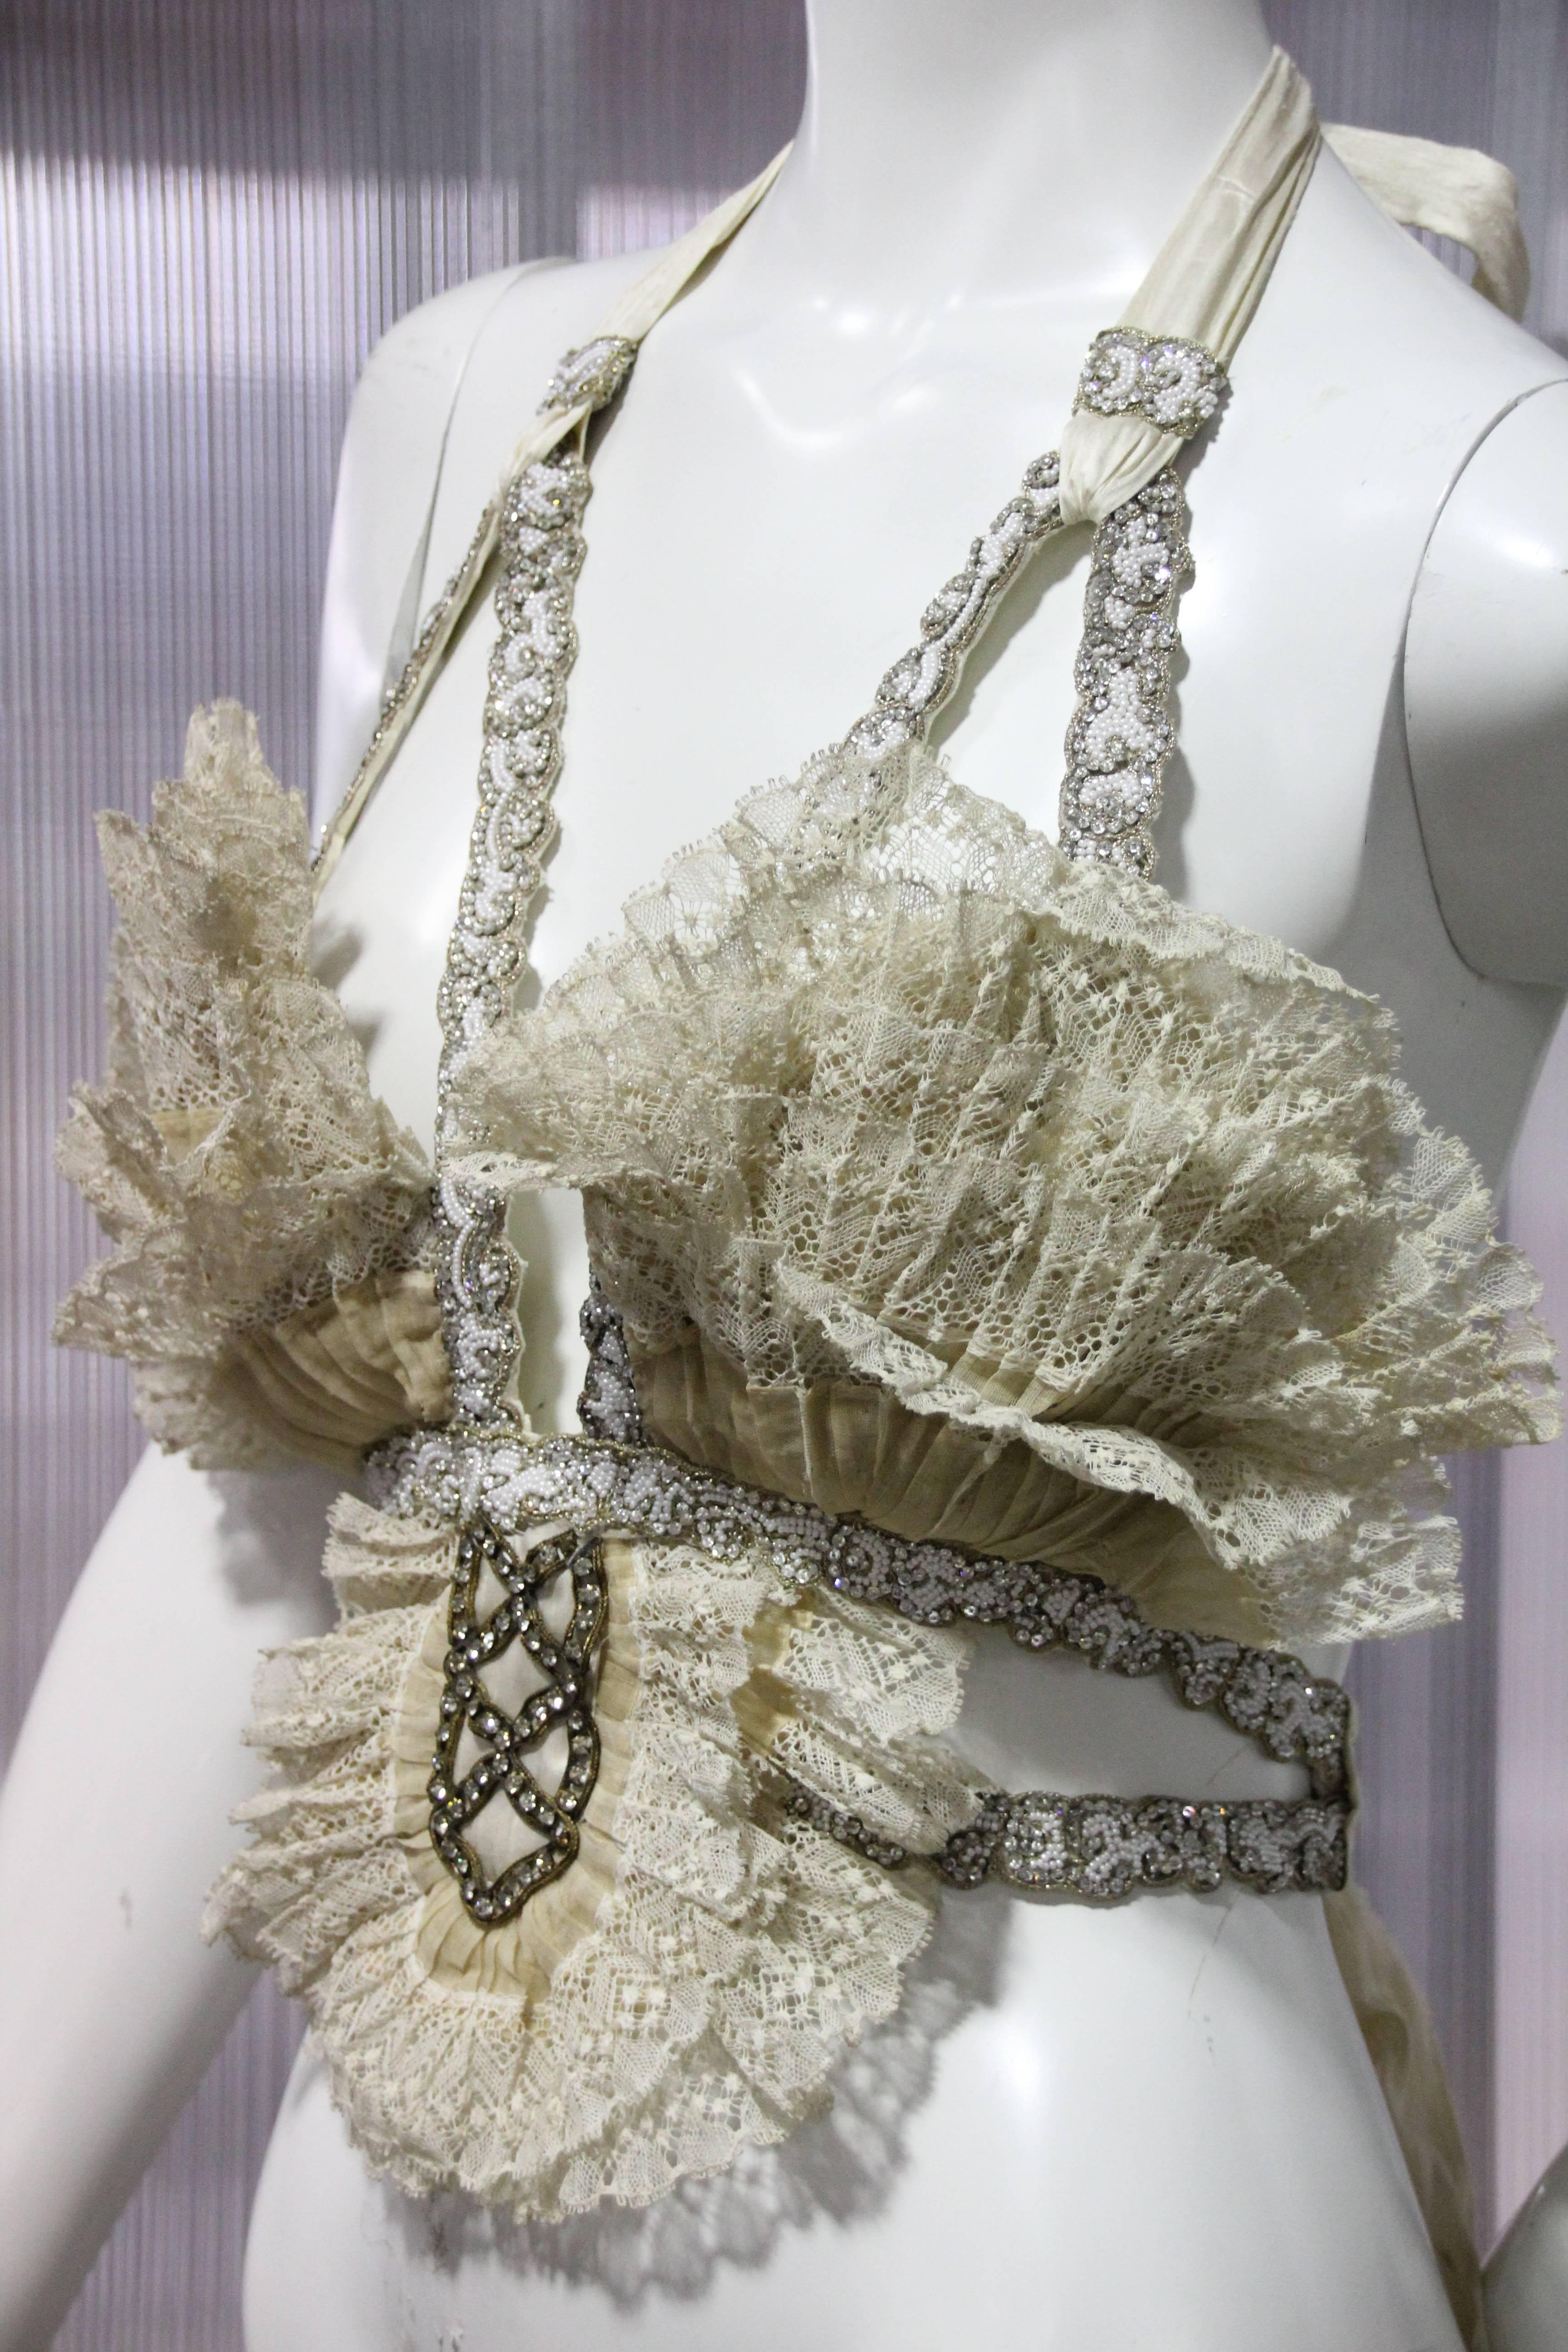 Women's Abbreviated Victorian Cream Pleated Lace Bustier with Silk Ties at Back